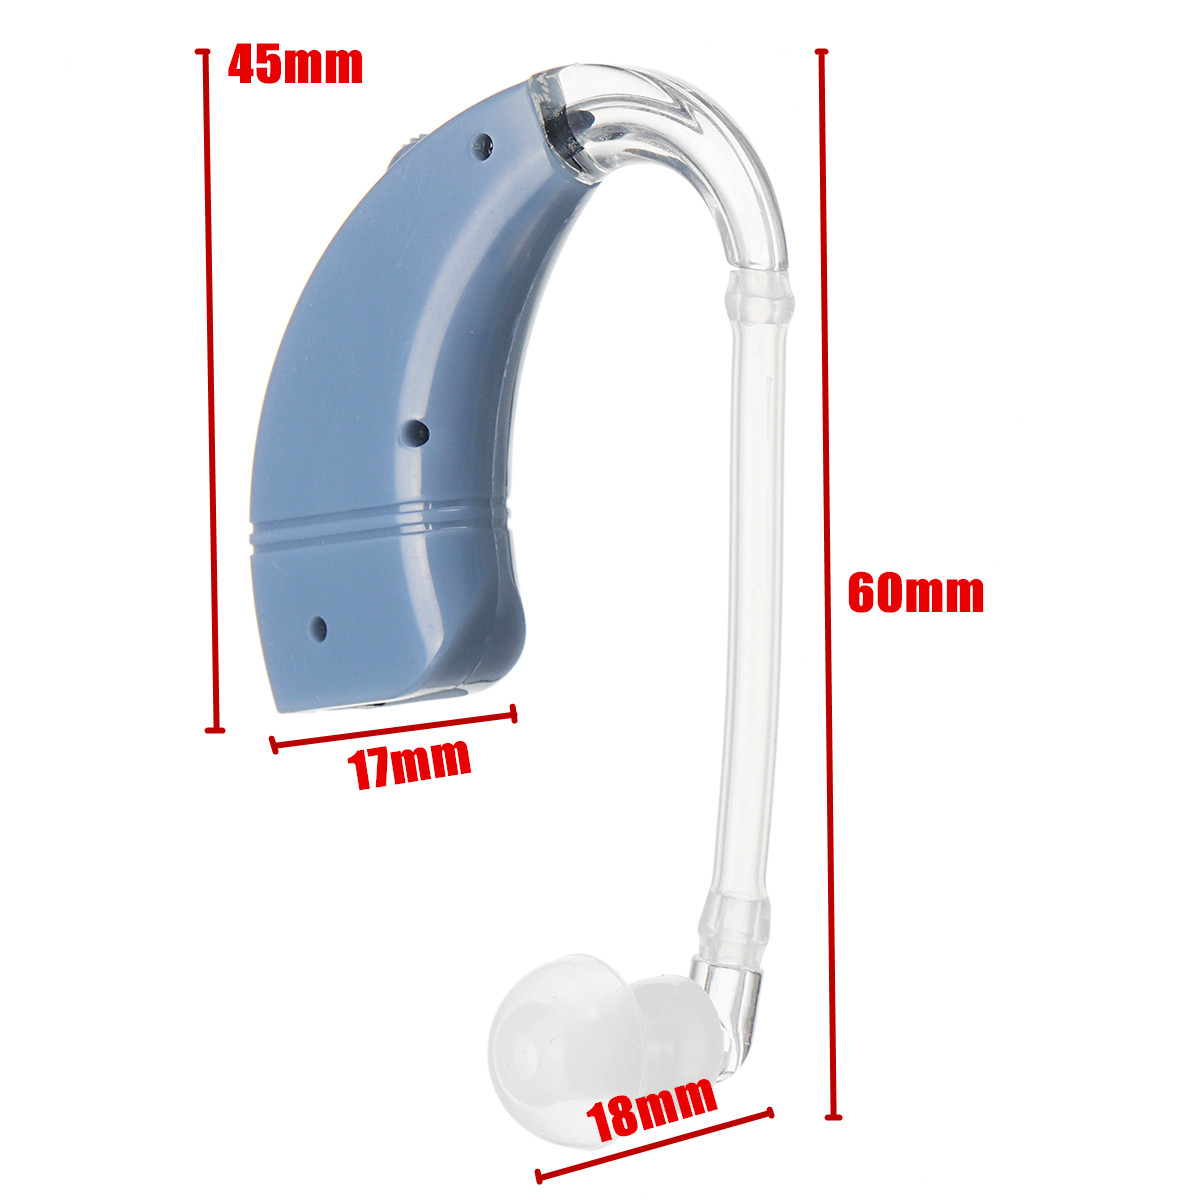 Digital-Hearing-Aid-USB-Rechargeable-Behind-Ear-Tone-Voice-Sound-Amplifier-Hearing-Aid-Kit-1404310